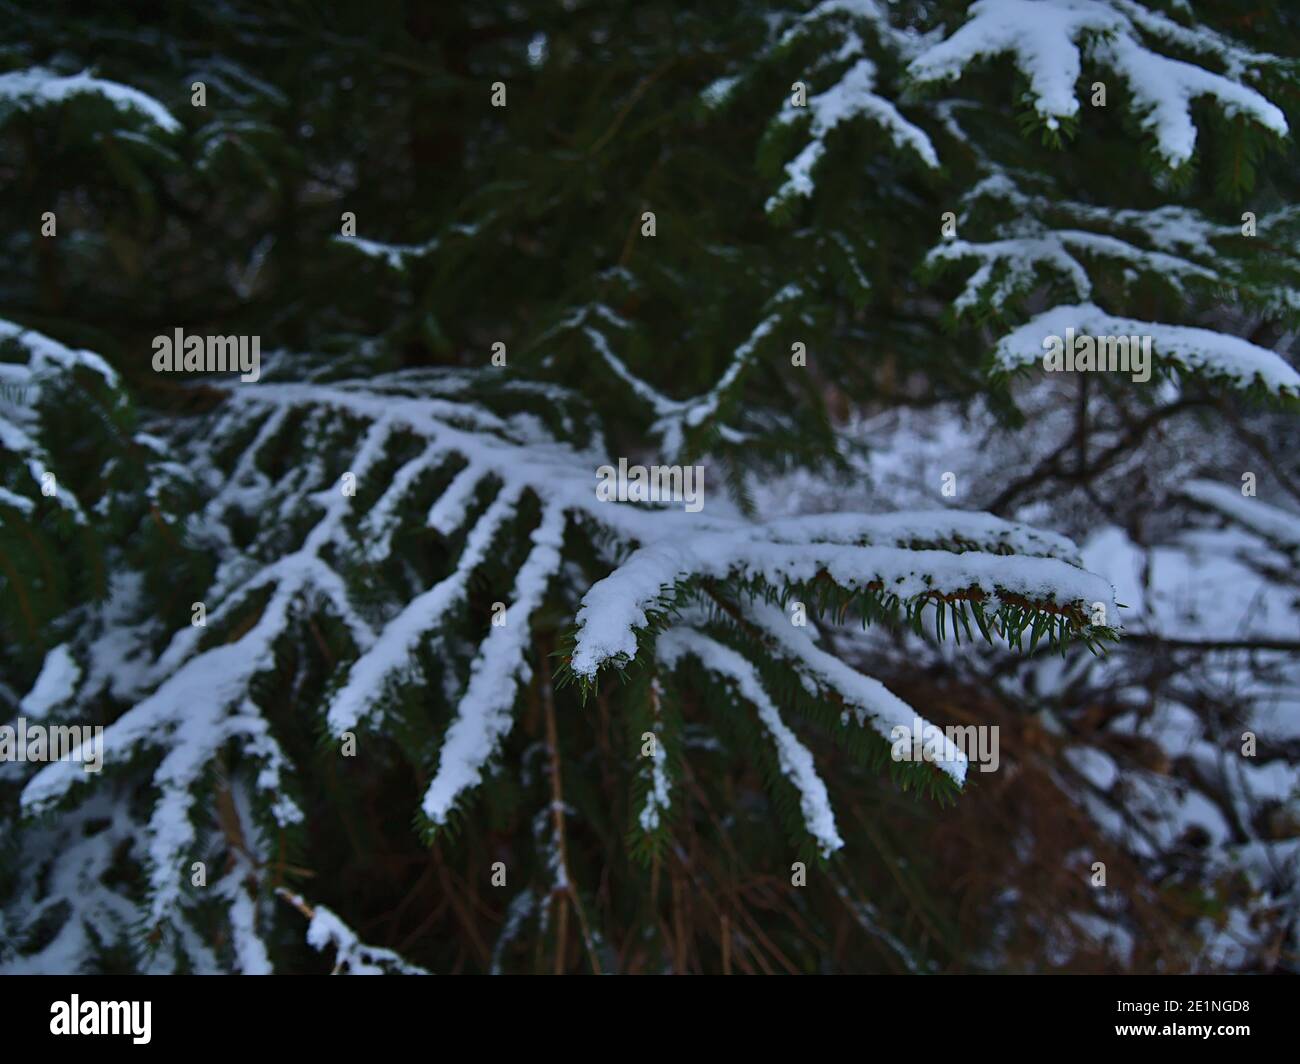 Closeup view of the branch of a fir tree with green colored sharp needles covered by snow in a forest near Gruibingen, Swabian Alb, Germany. Stock Photo